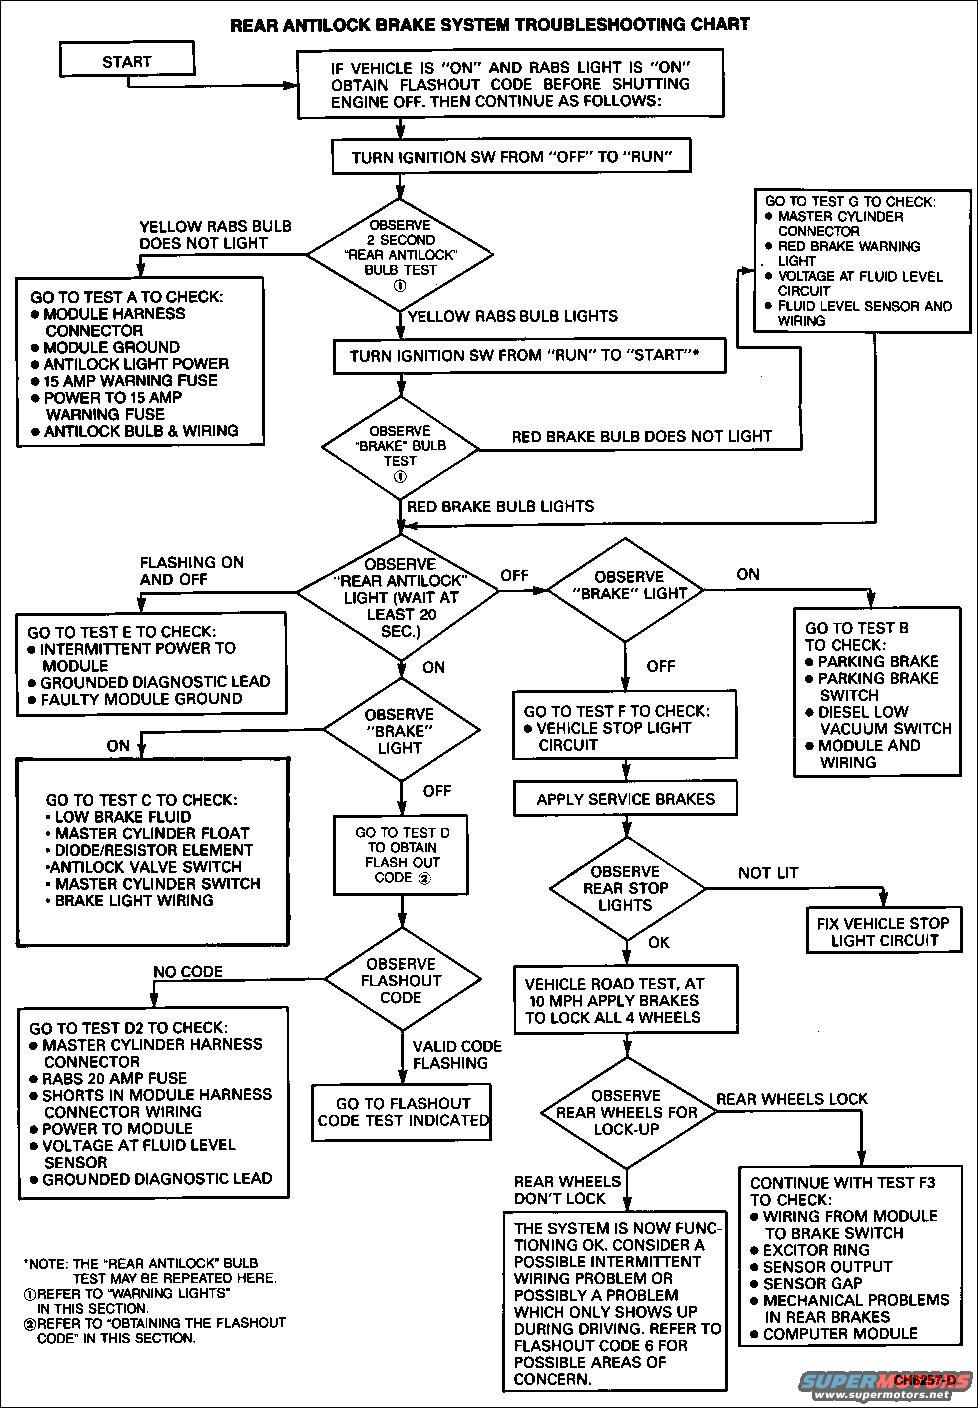 Ford flow charts